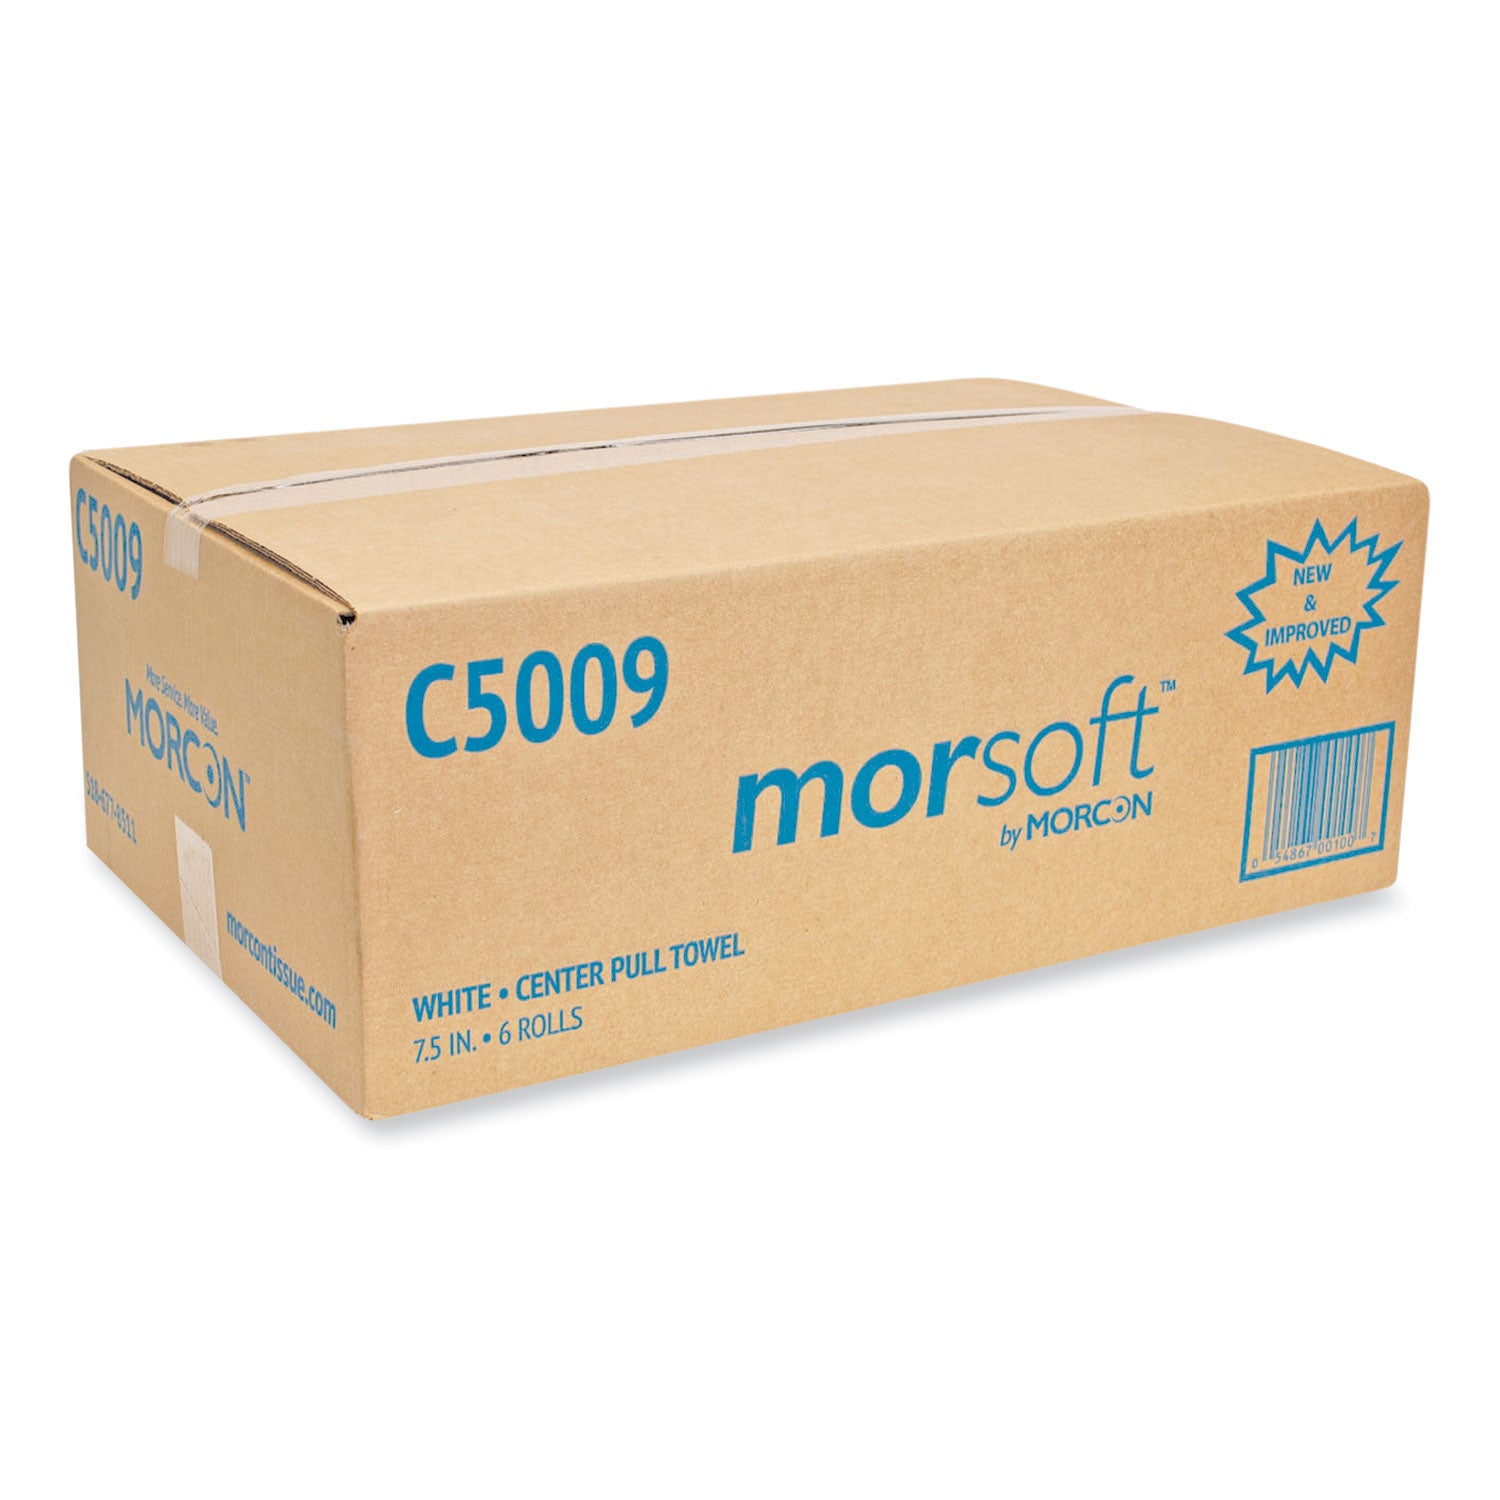 morsoft-center-pull-roll-towels-2-ply-69-dia-500-sheets-roll-6-rolls-carton_morc5009 - 2